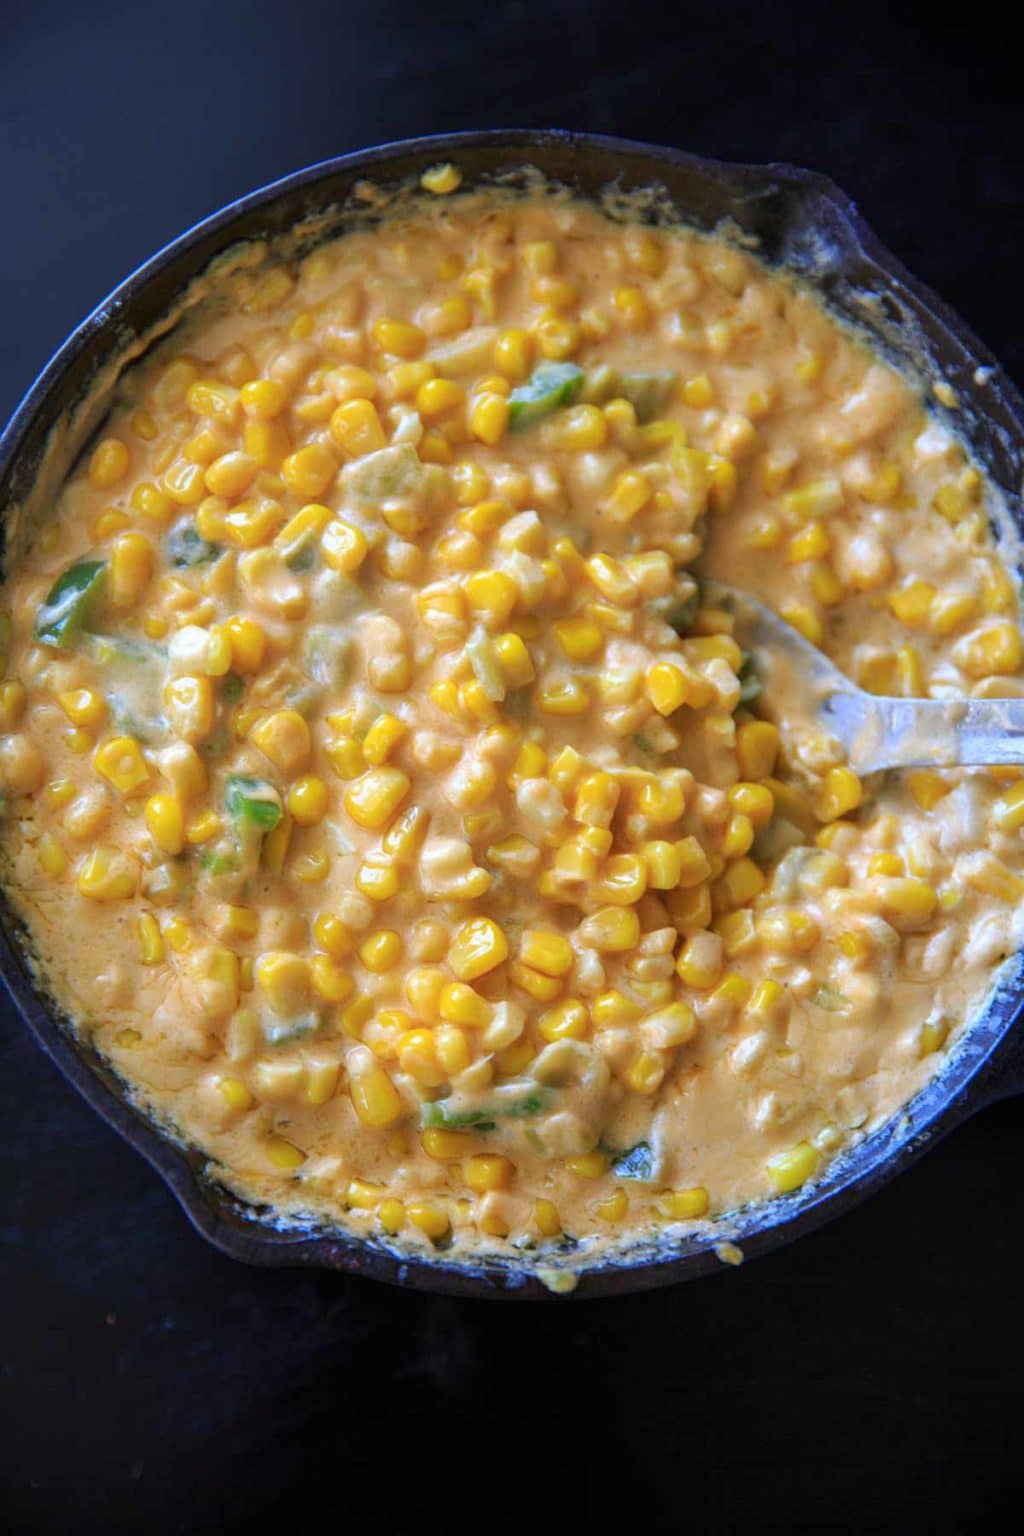 Creamy Spicy Hot Corn Dip makes a great appetizer for parties or game day. Addicting and delicious!